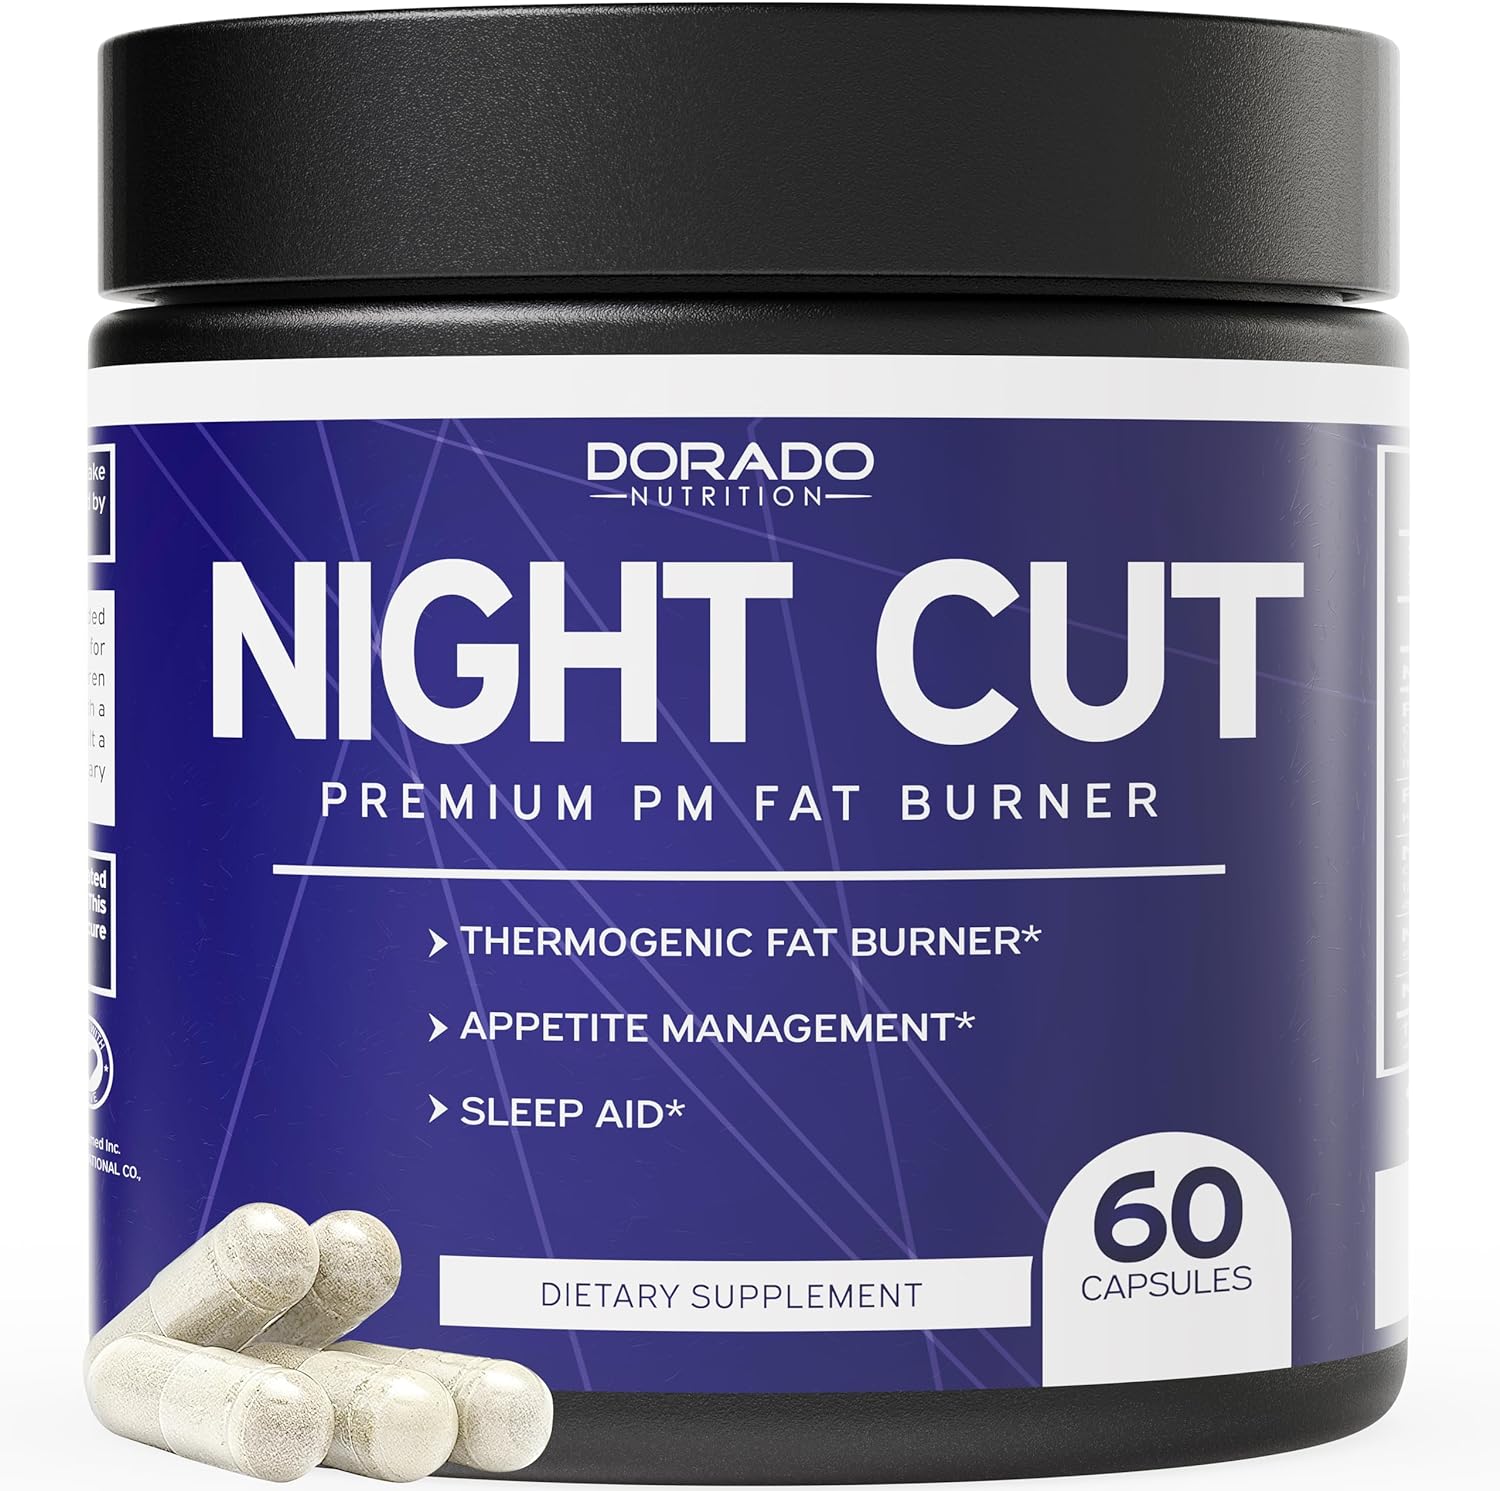 Night Time Fat Burner Pills - Thermogenic Weight Loss  Sleep Support - Appetite Suppressant, Metabolism Booster, Weight Loss Diet Pills - Grains of Paradise - Melatonin - Non-GMO  Vegan Capsules